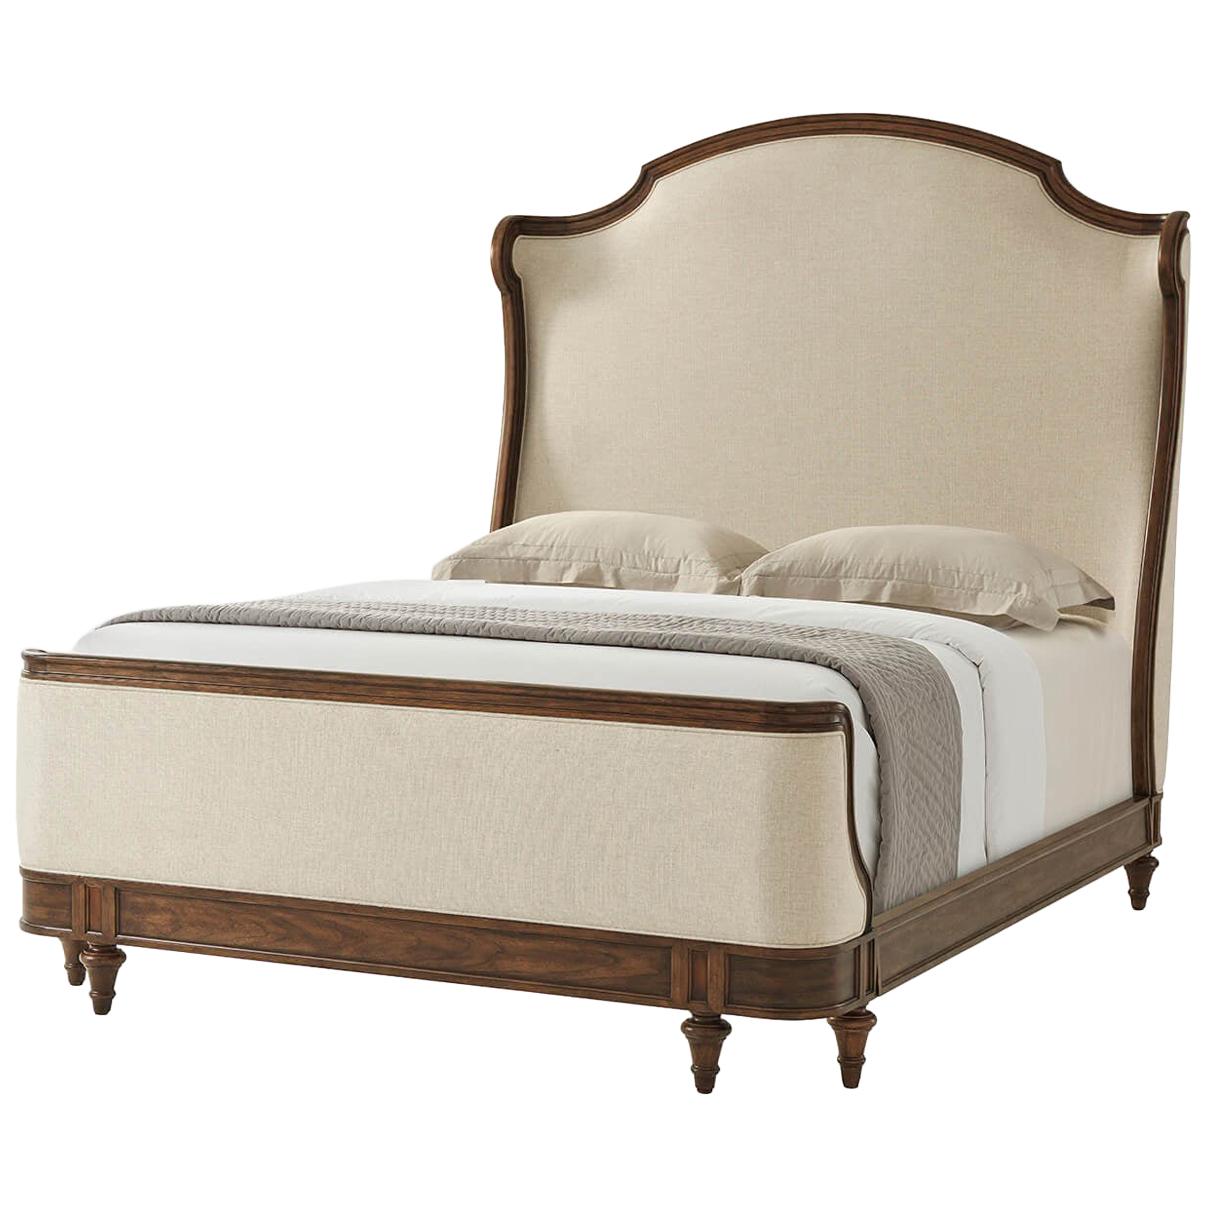 Provincial Carved Queen Size Bed